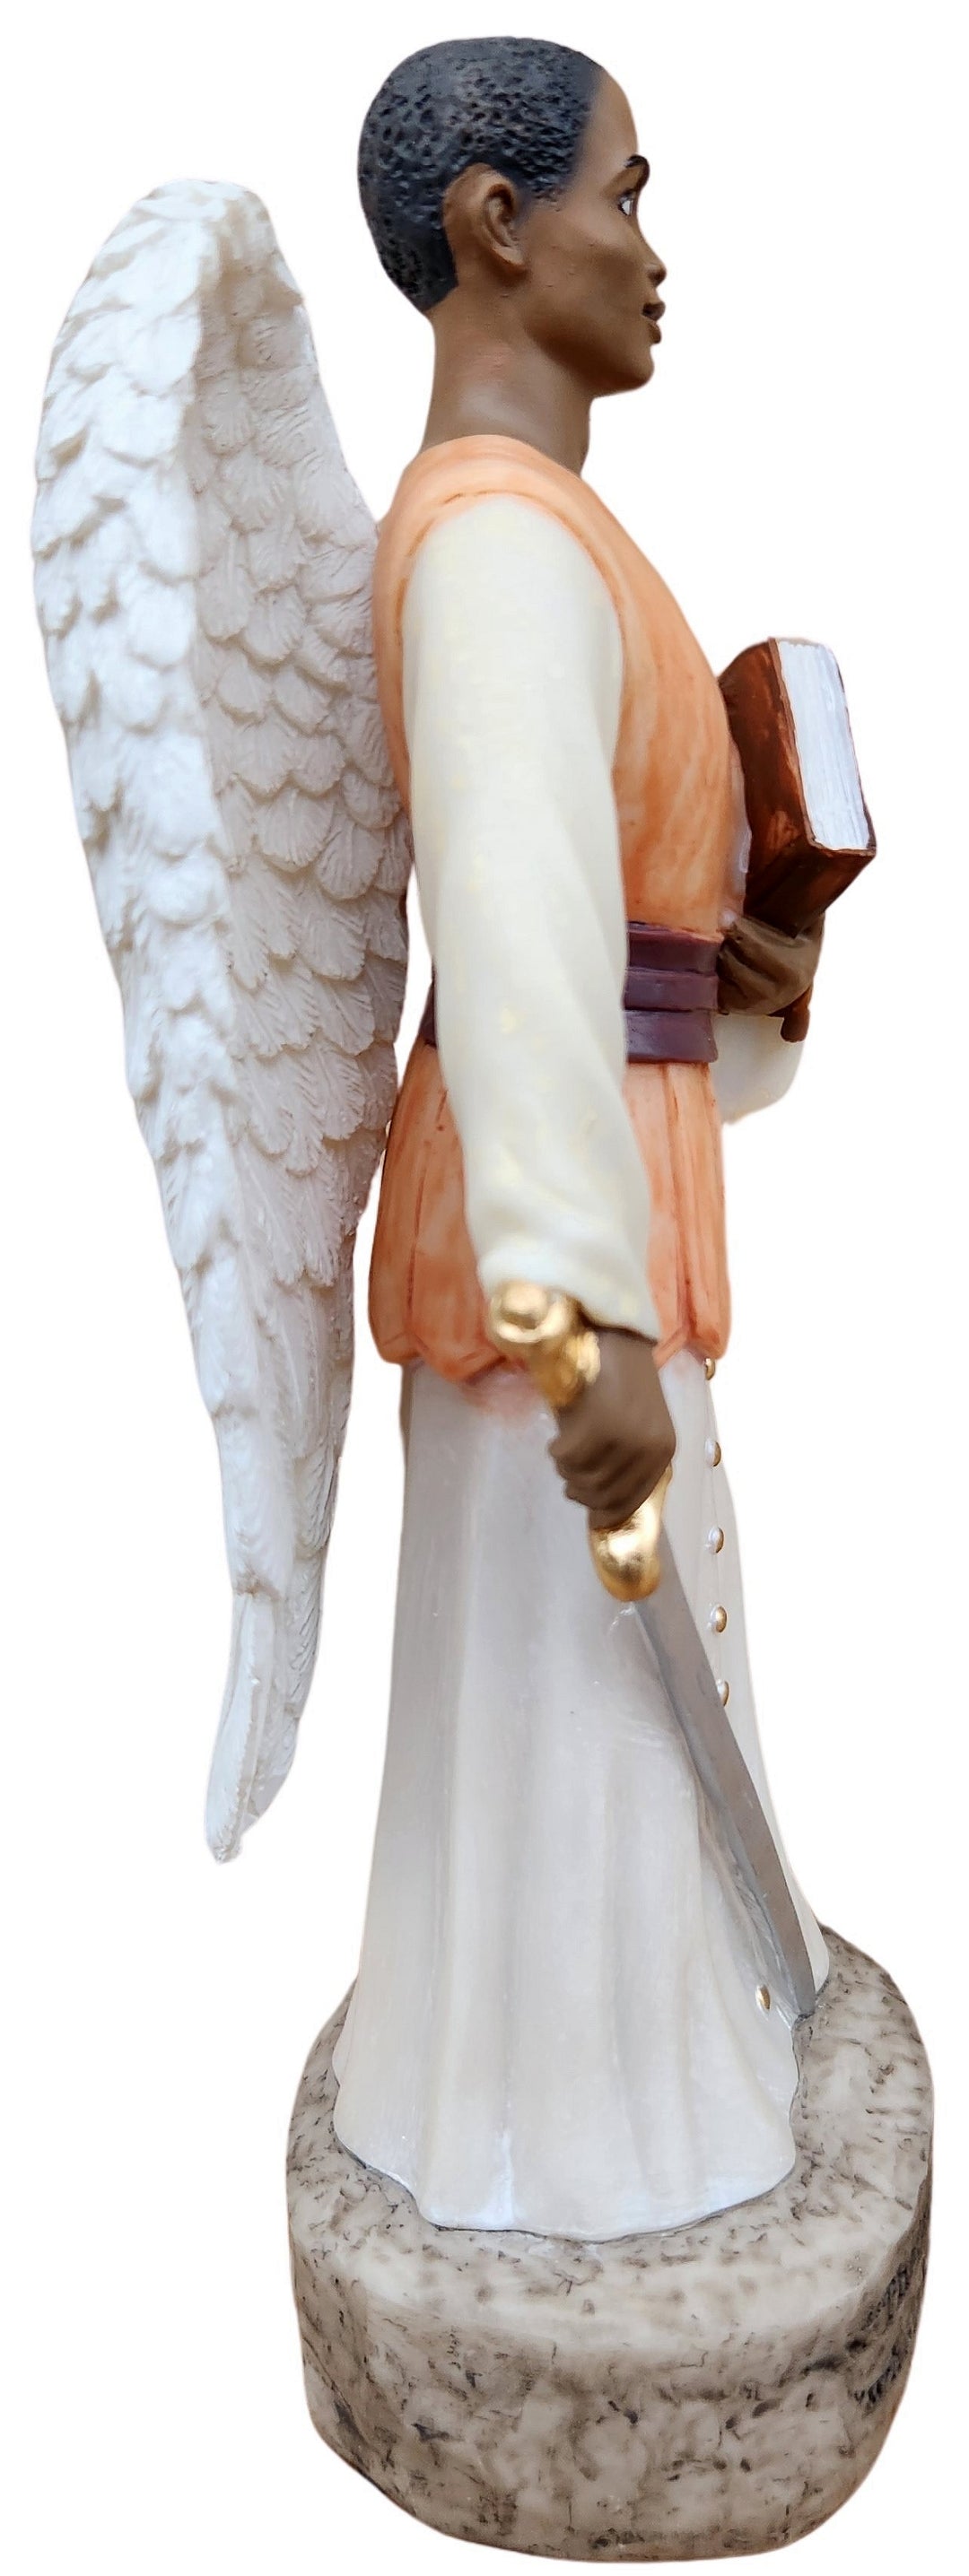 Sword of the Spirit: African American Angelic Figurine (Armor of the Lord Series)